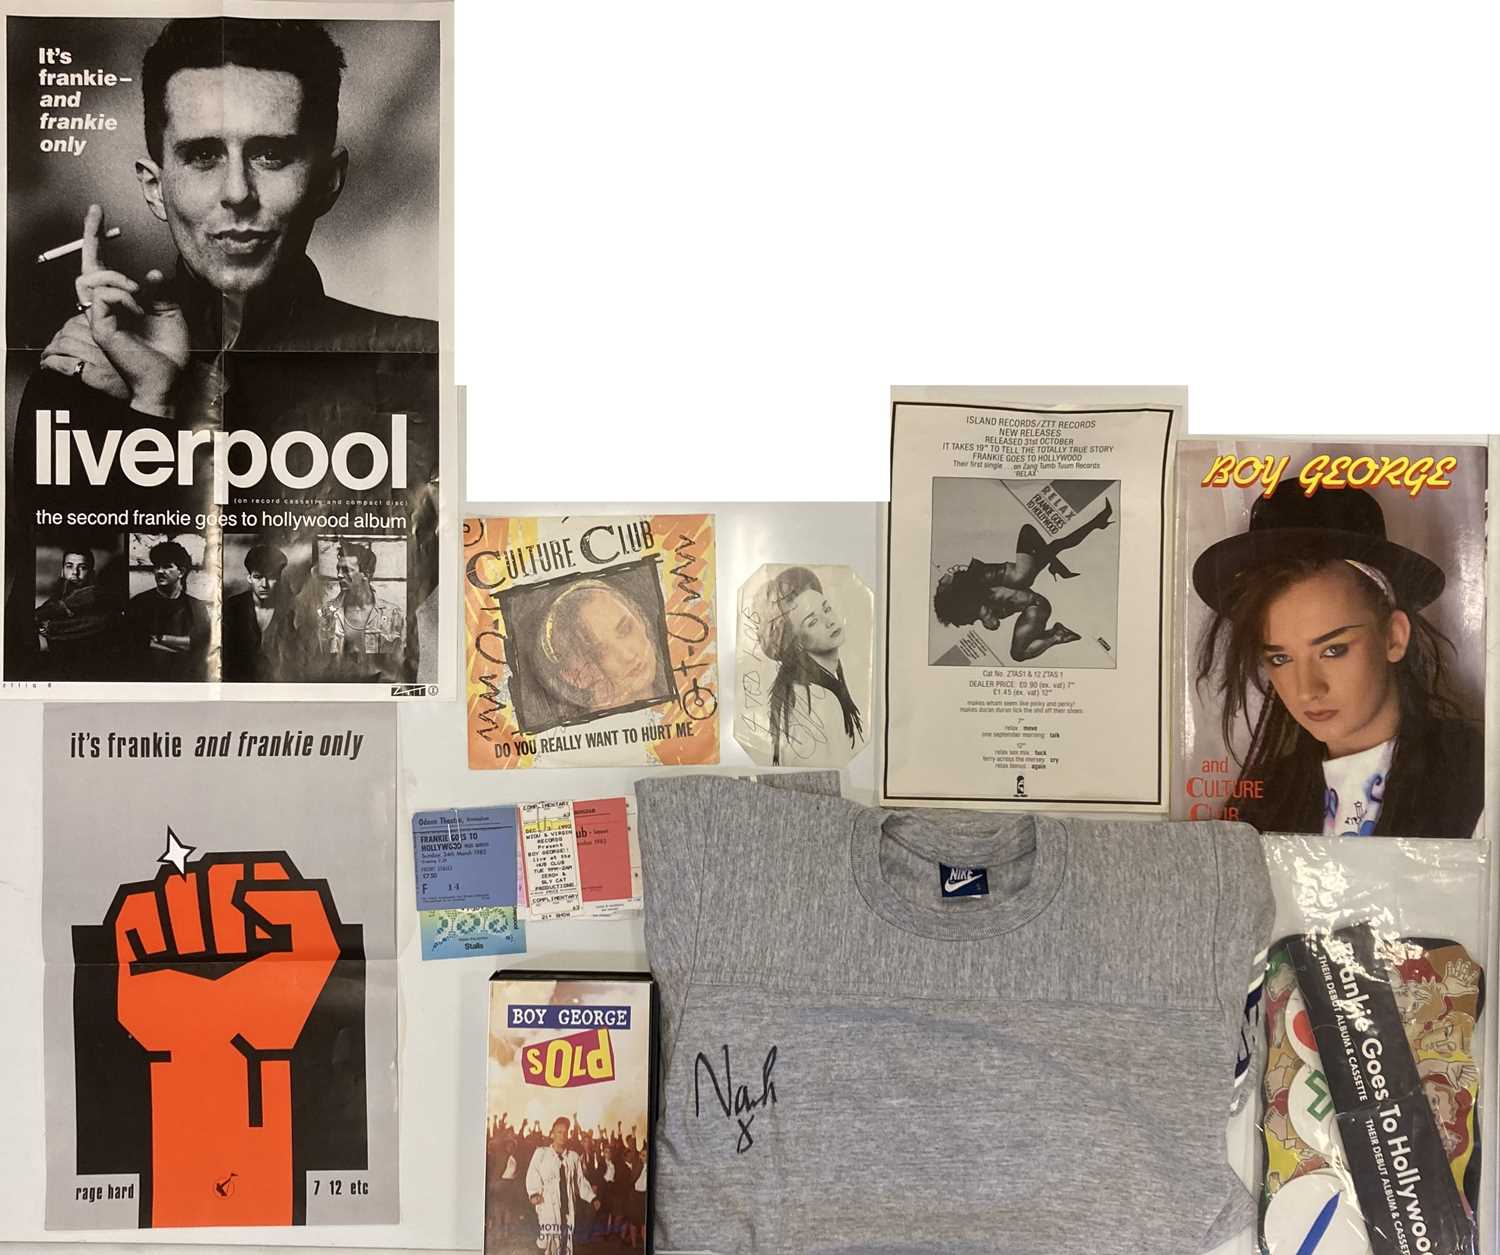 Lot 10 - CULTURE CLUB AND FRANKIE GOES TO HOLLYWOOD MEMORABILIA